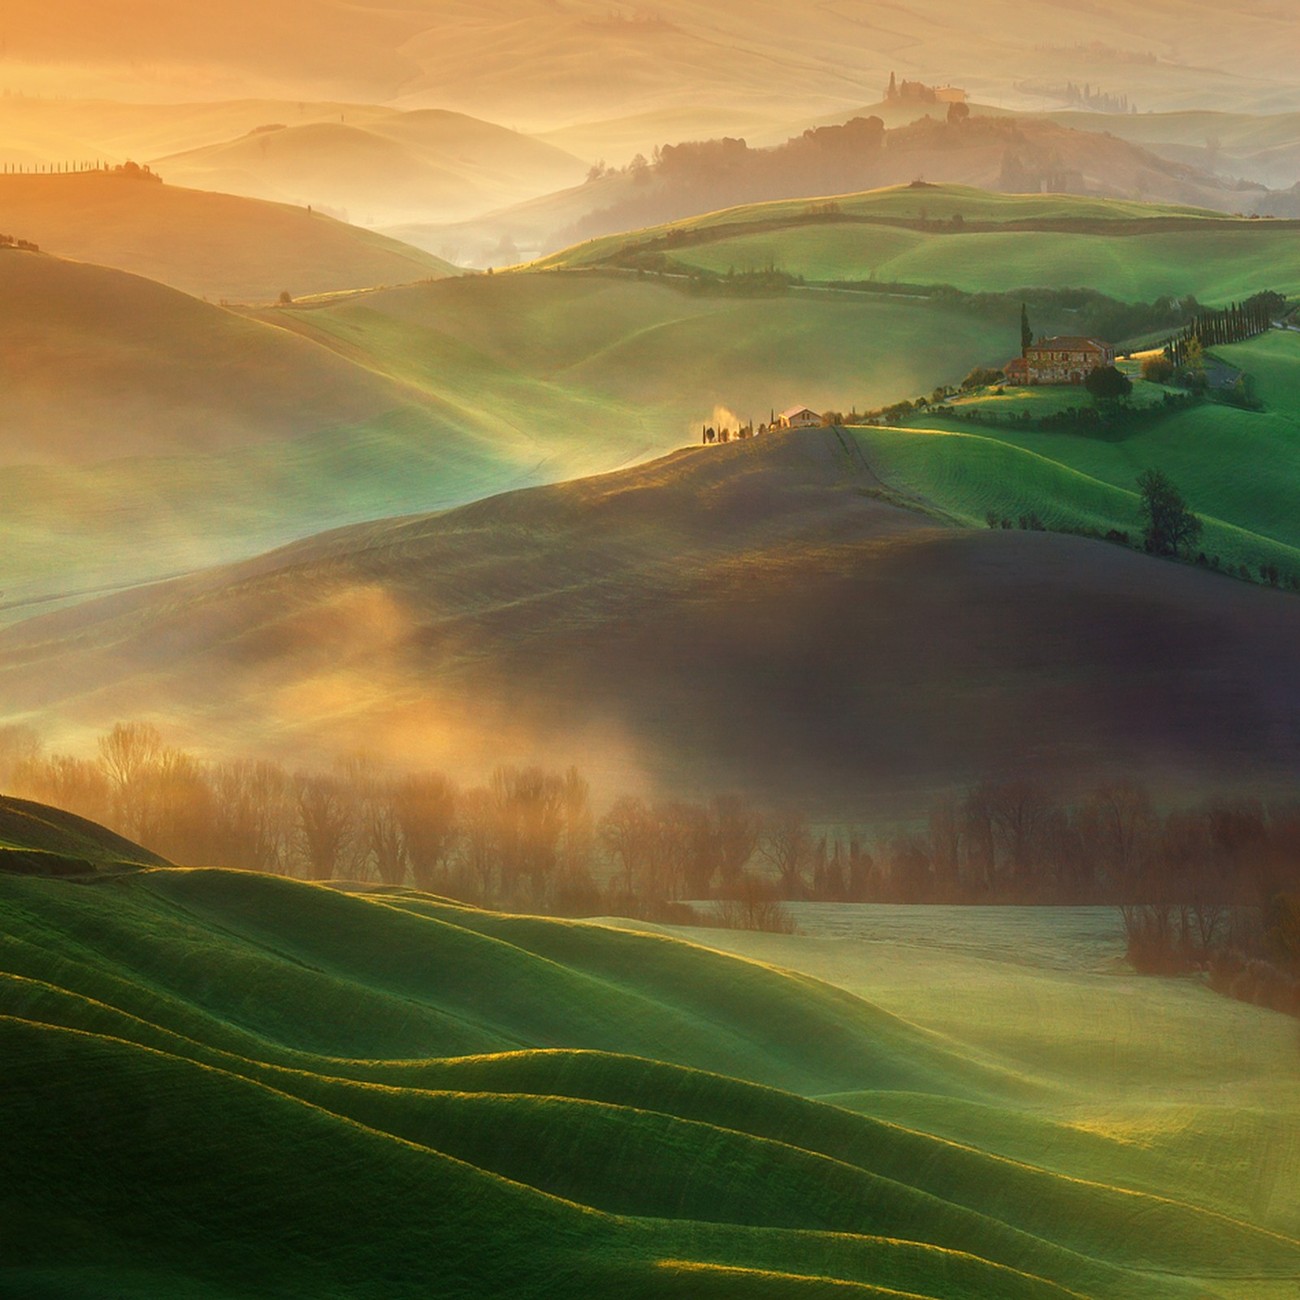 17 Unbelievably 3D Photos of Hills! Learn The Tricks Behind This Shot